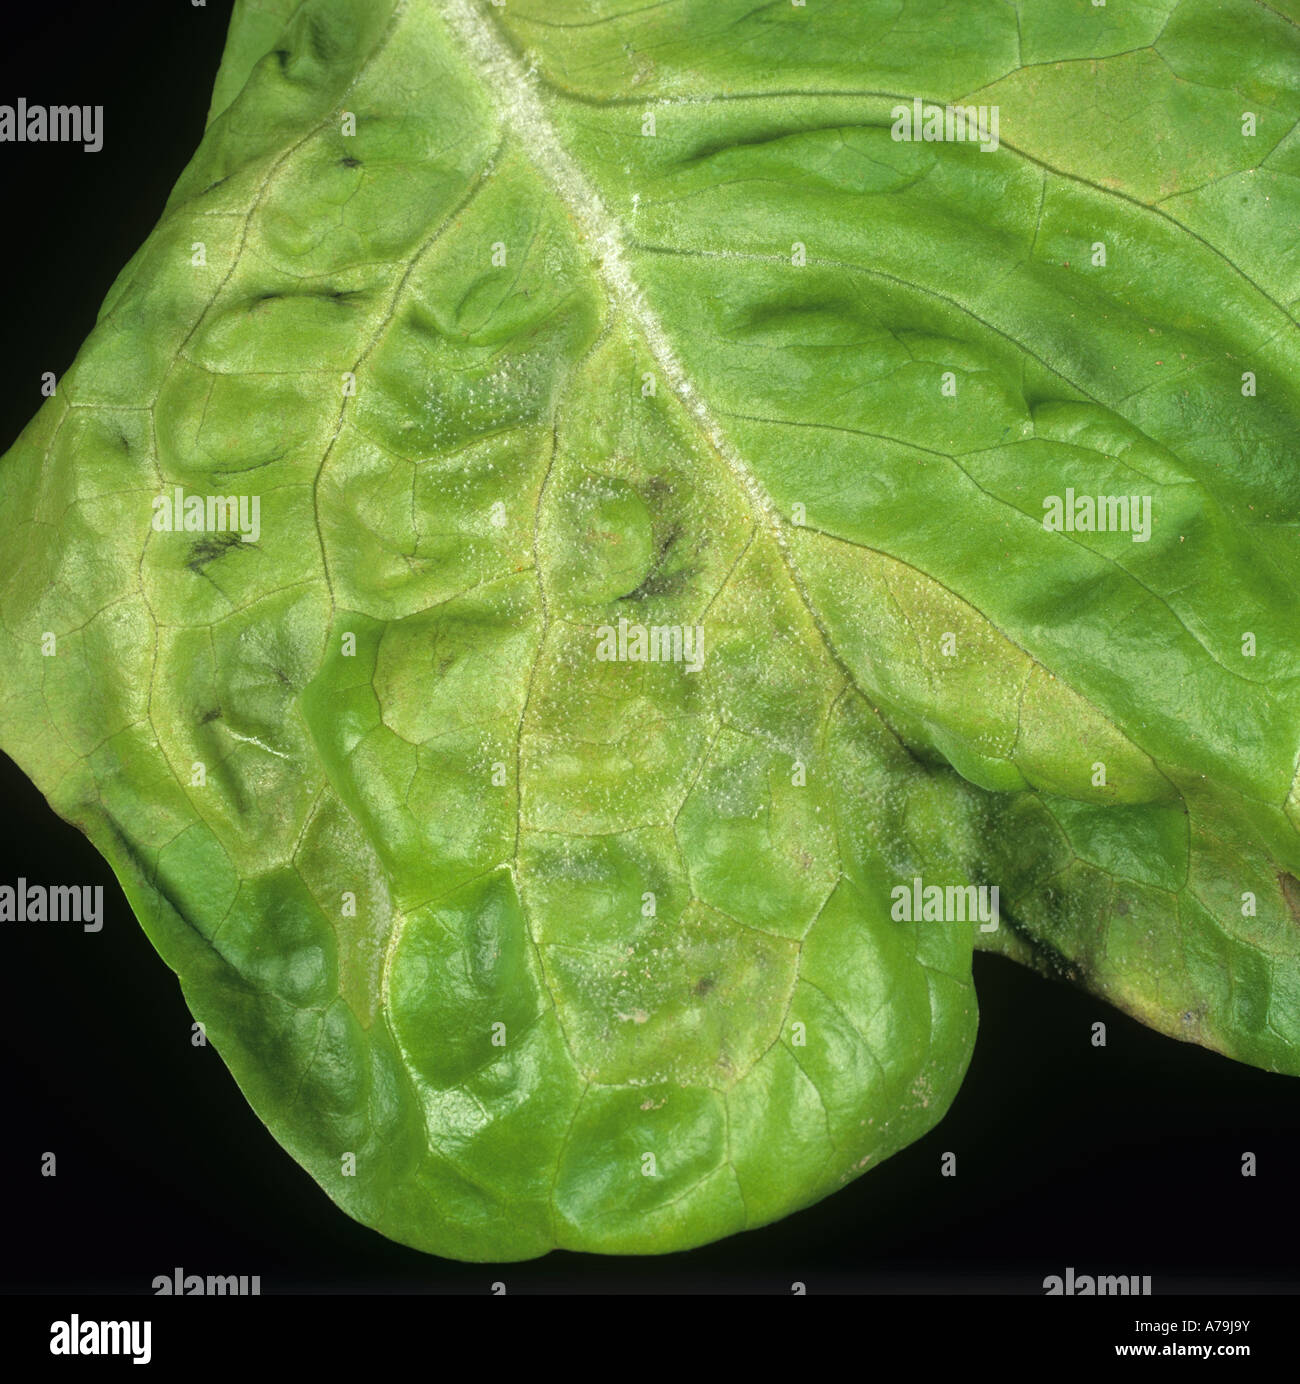 Early infection of downy mildew Bremia lactucae mycelium on lettuce leaf Portugal Stock Photo